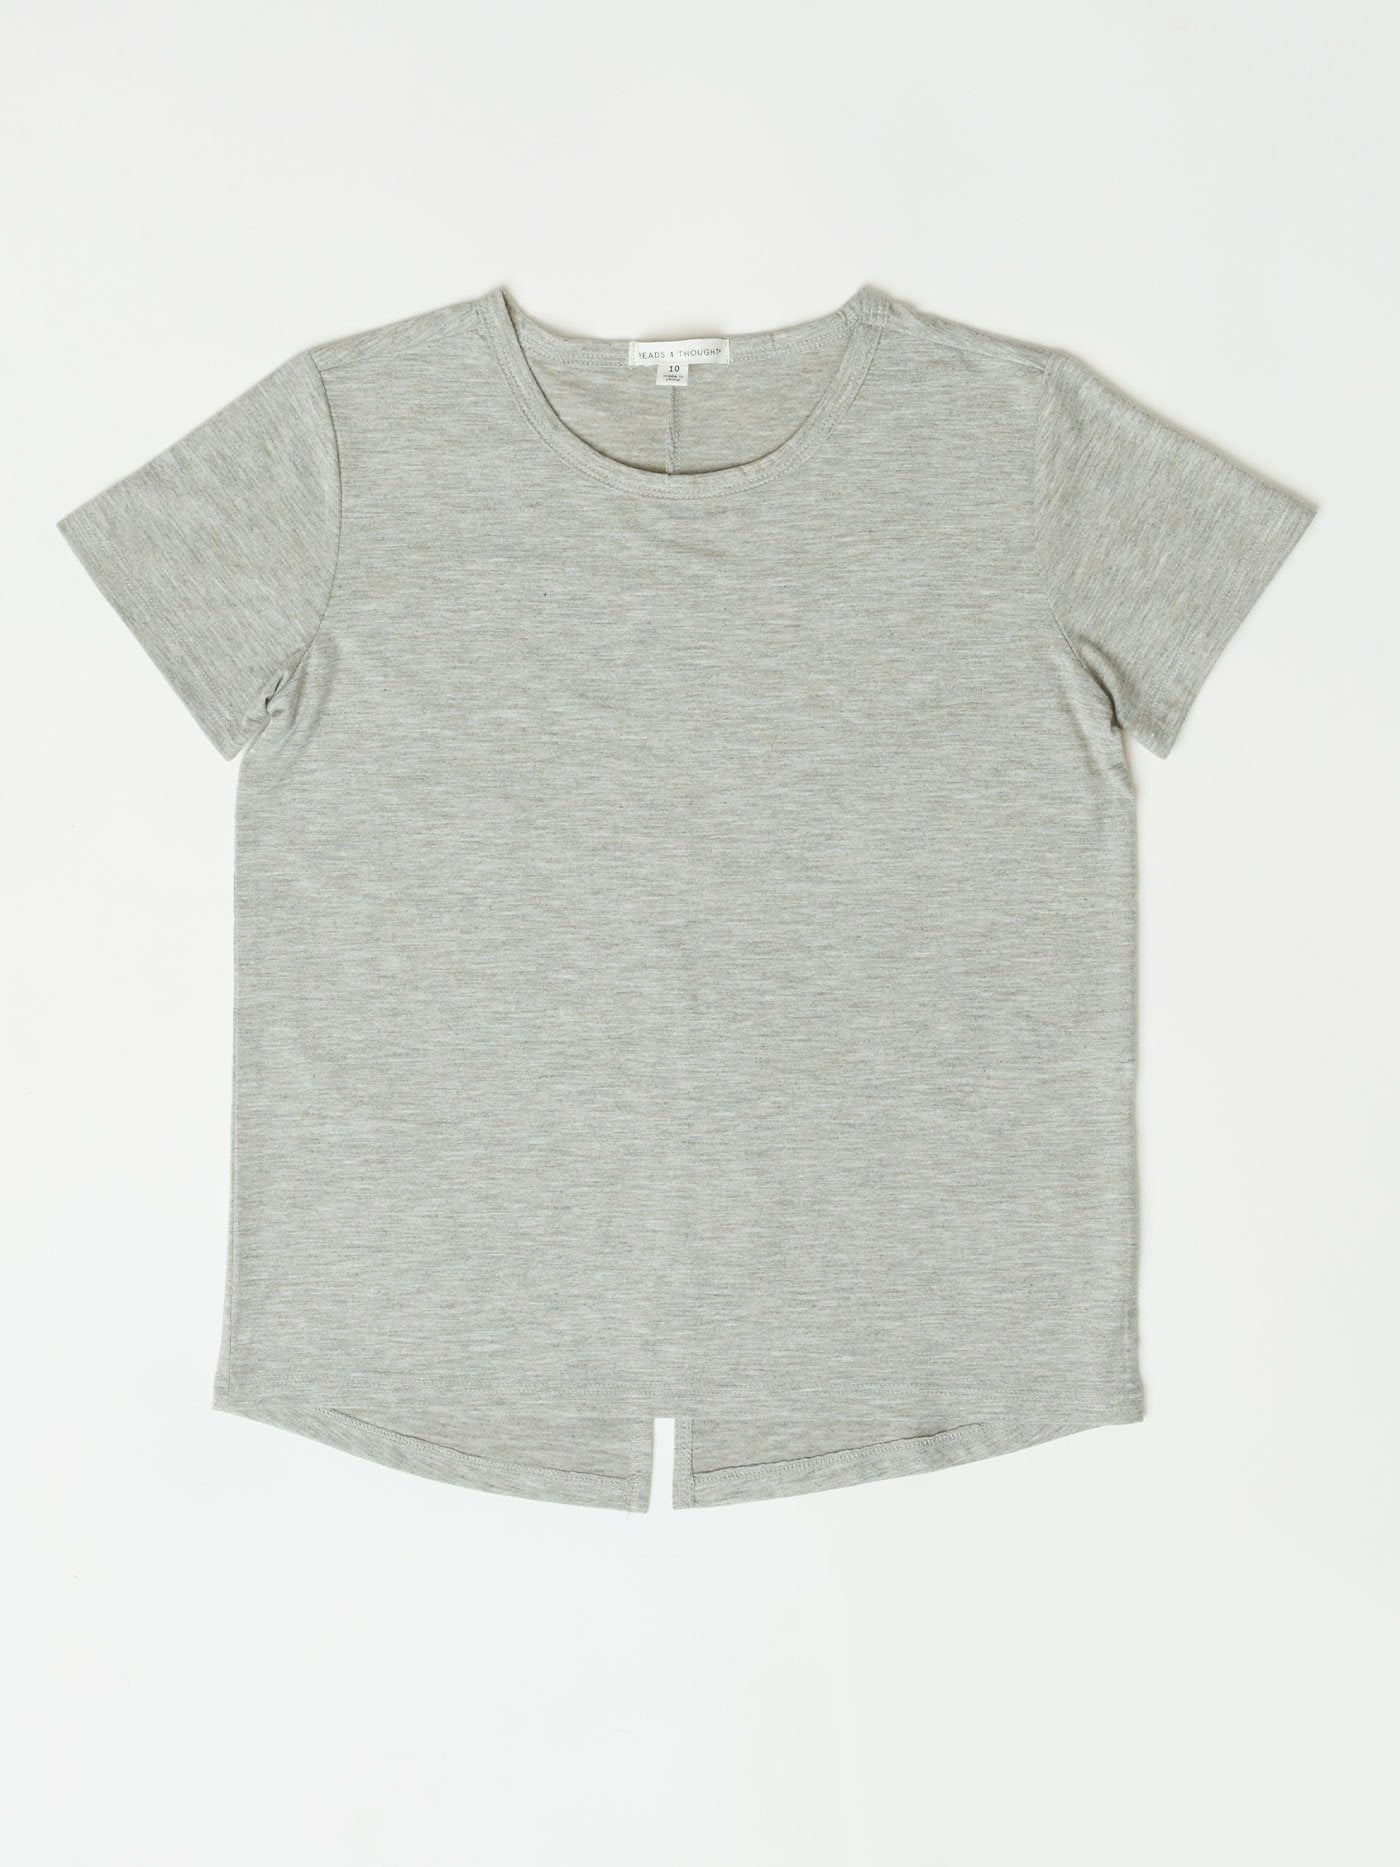 Kerry Split Back Tee Girls Tops Tshirt Threads 4 Thought